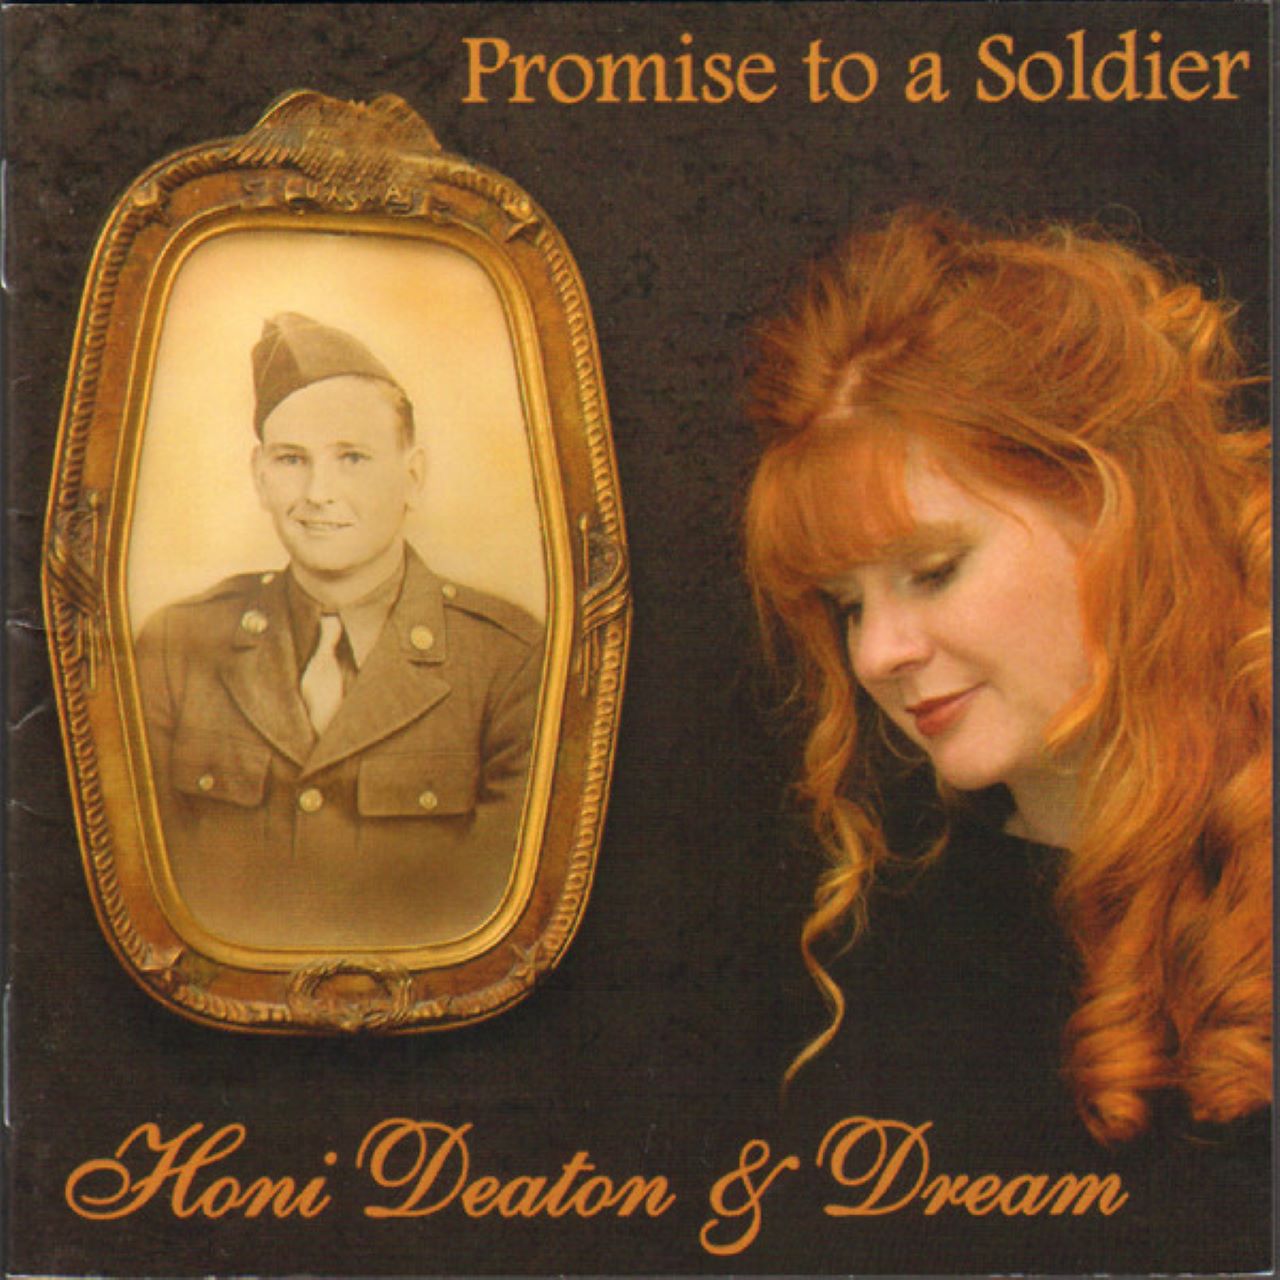 Honi Deaton - Promise To A Soldier cover album